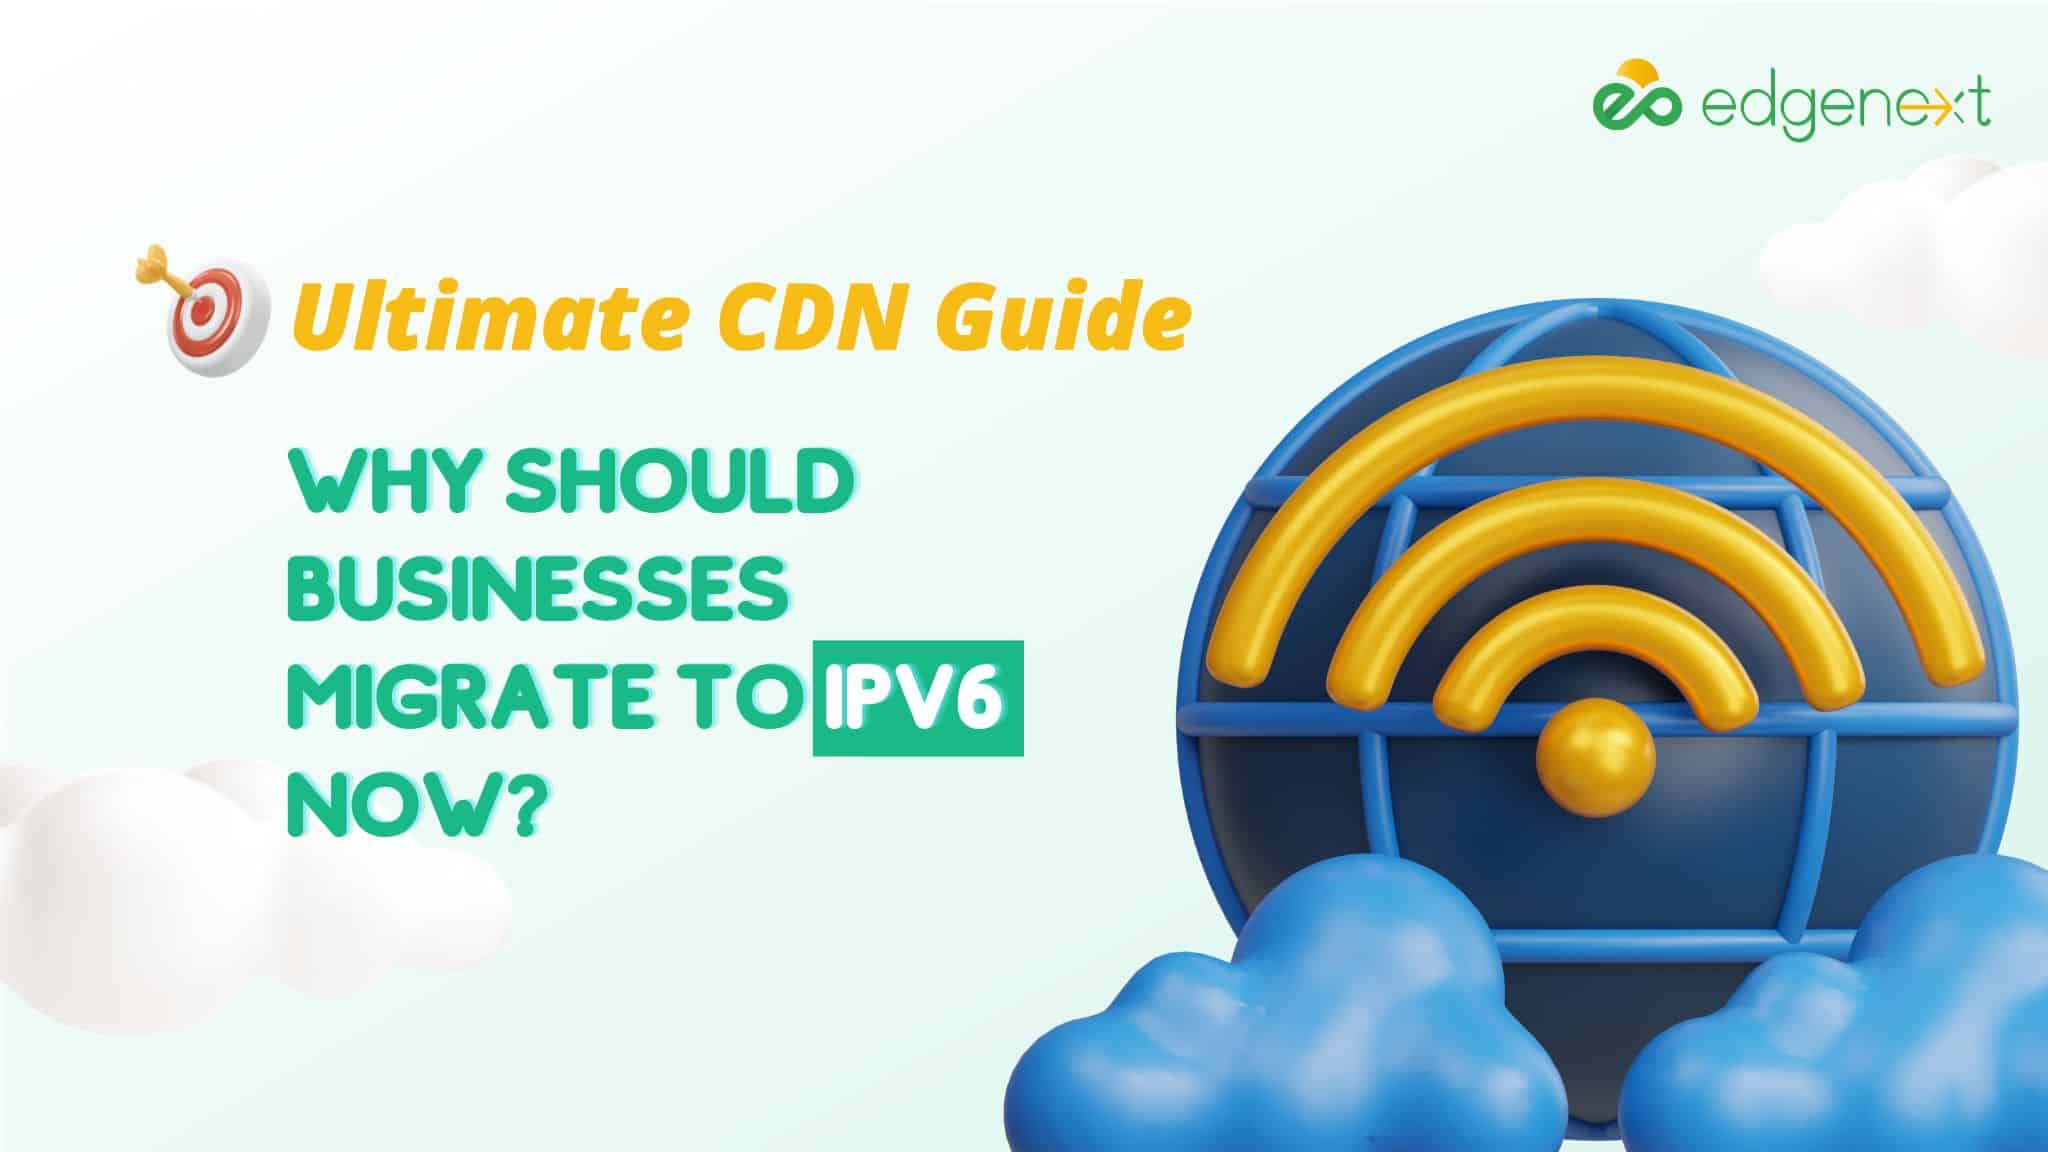 Why Should Businesses Migrate to IPv6 Now?